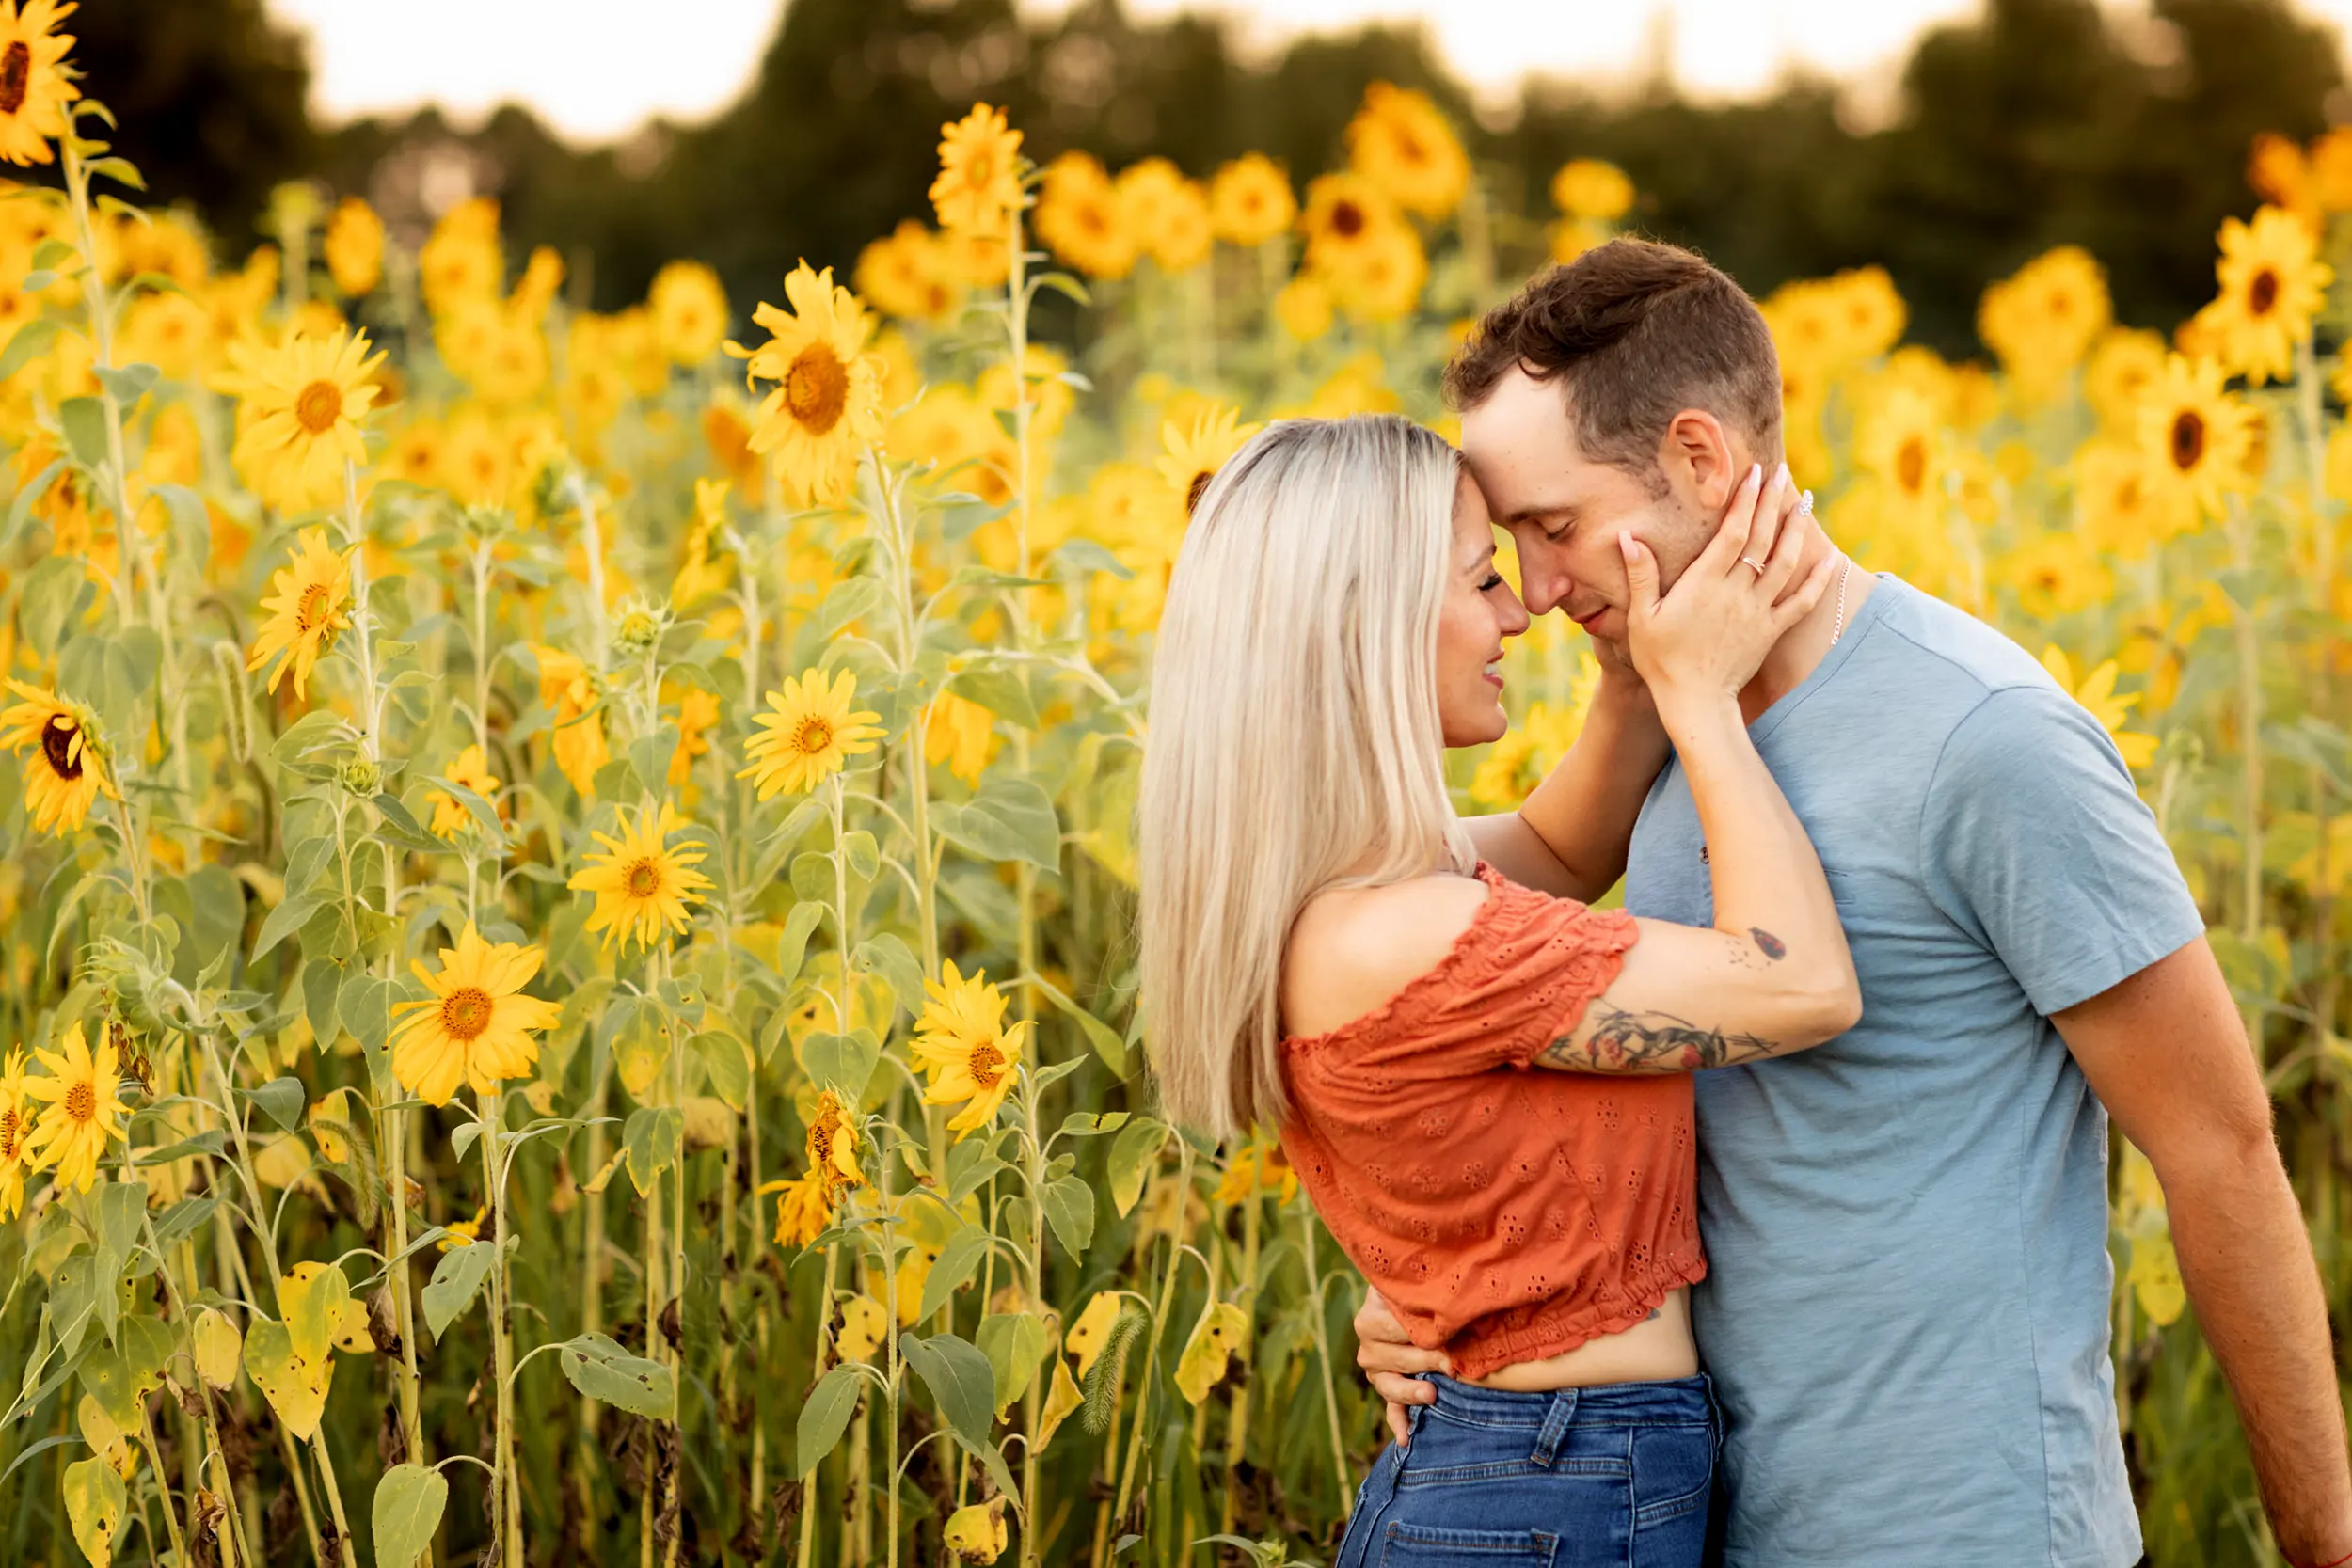 Finding the Best Columbus Engagement Photographer